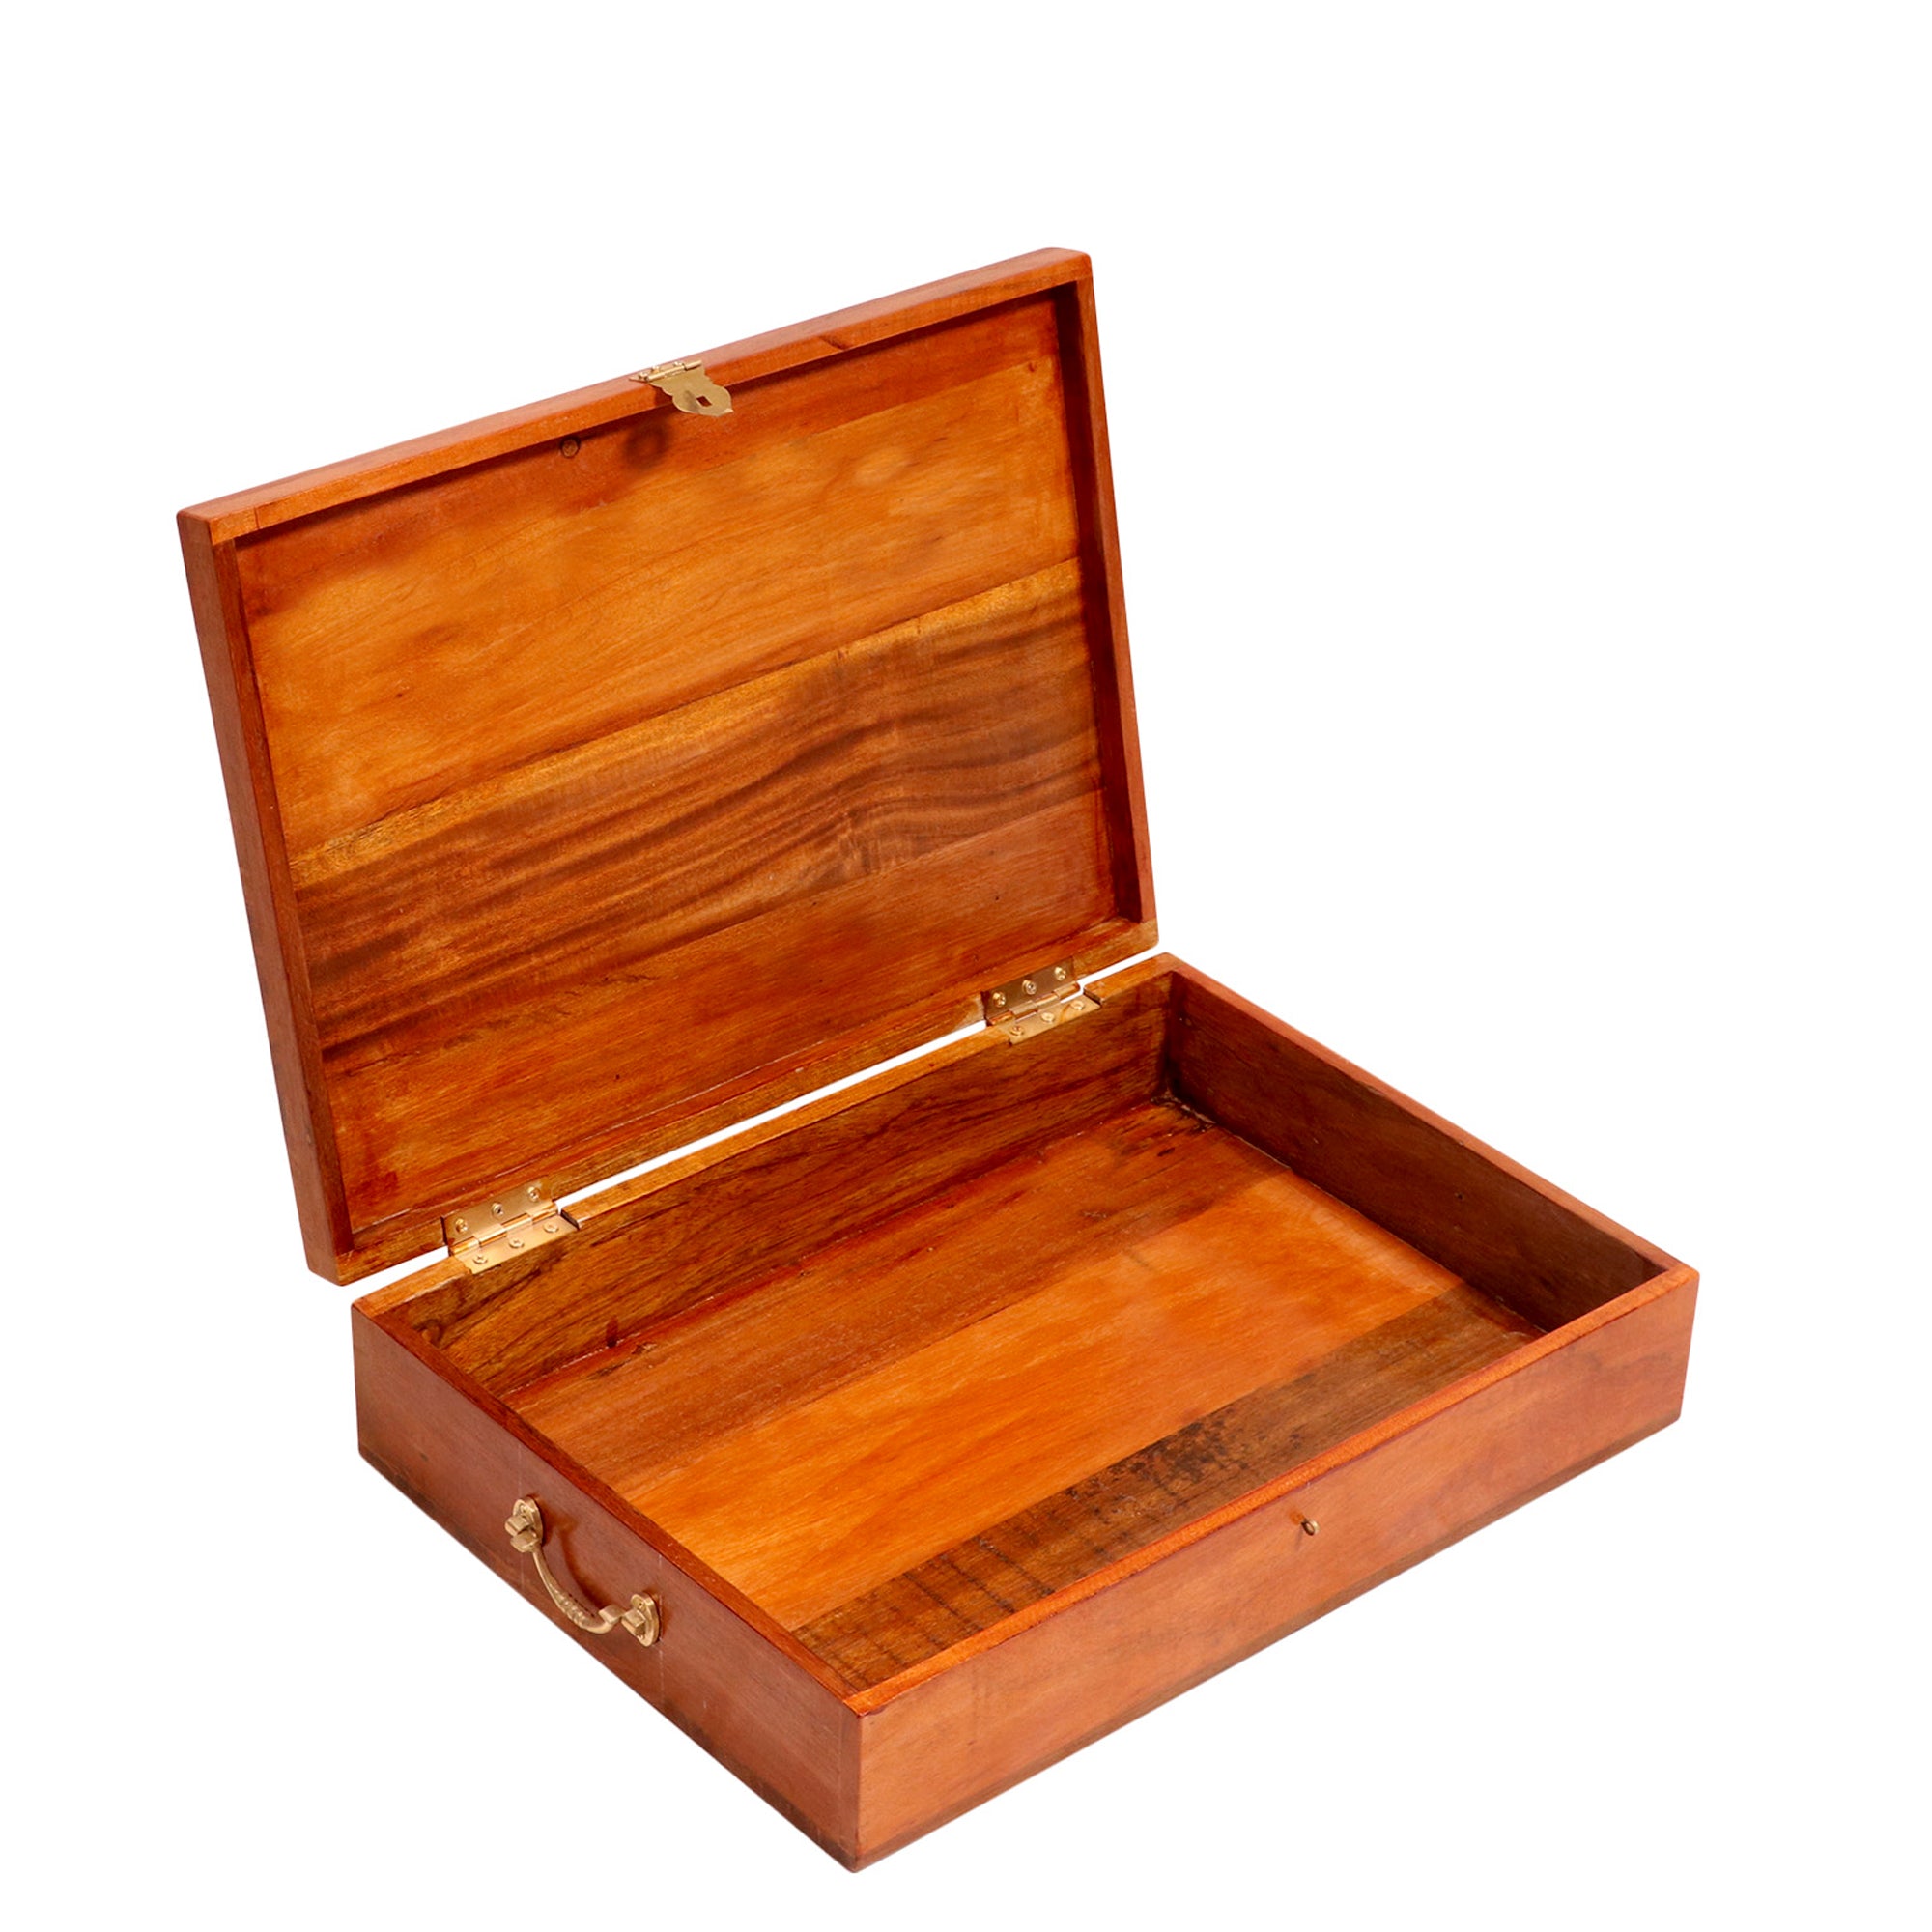 Solid wood carved petal golden boundary wooden Box Wooden Box